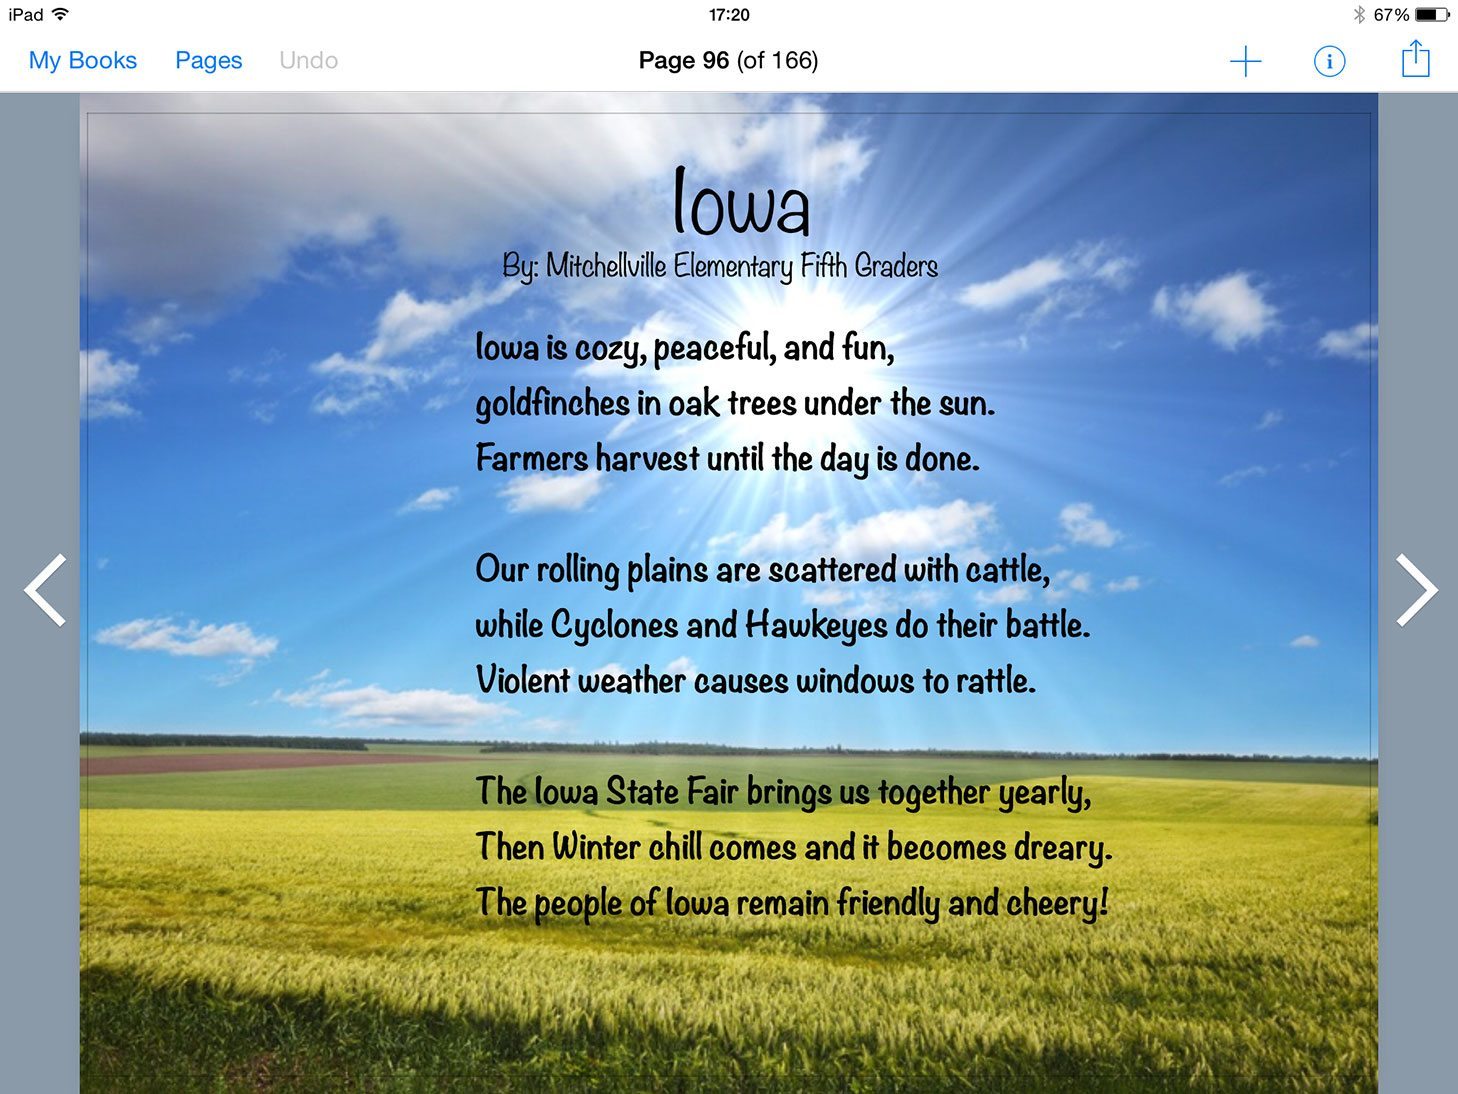 A poem about Iowa from Stephanie Laird's class